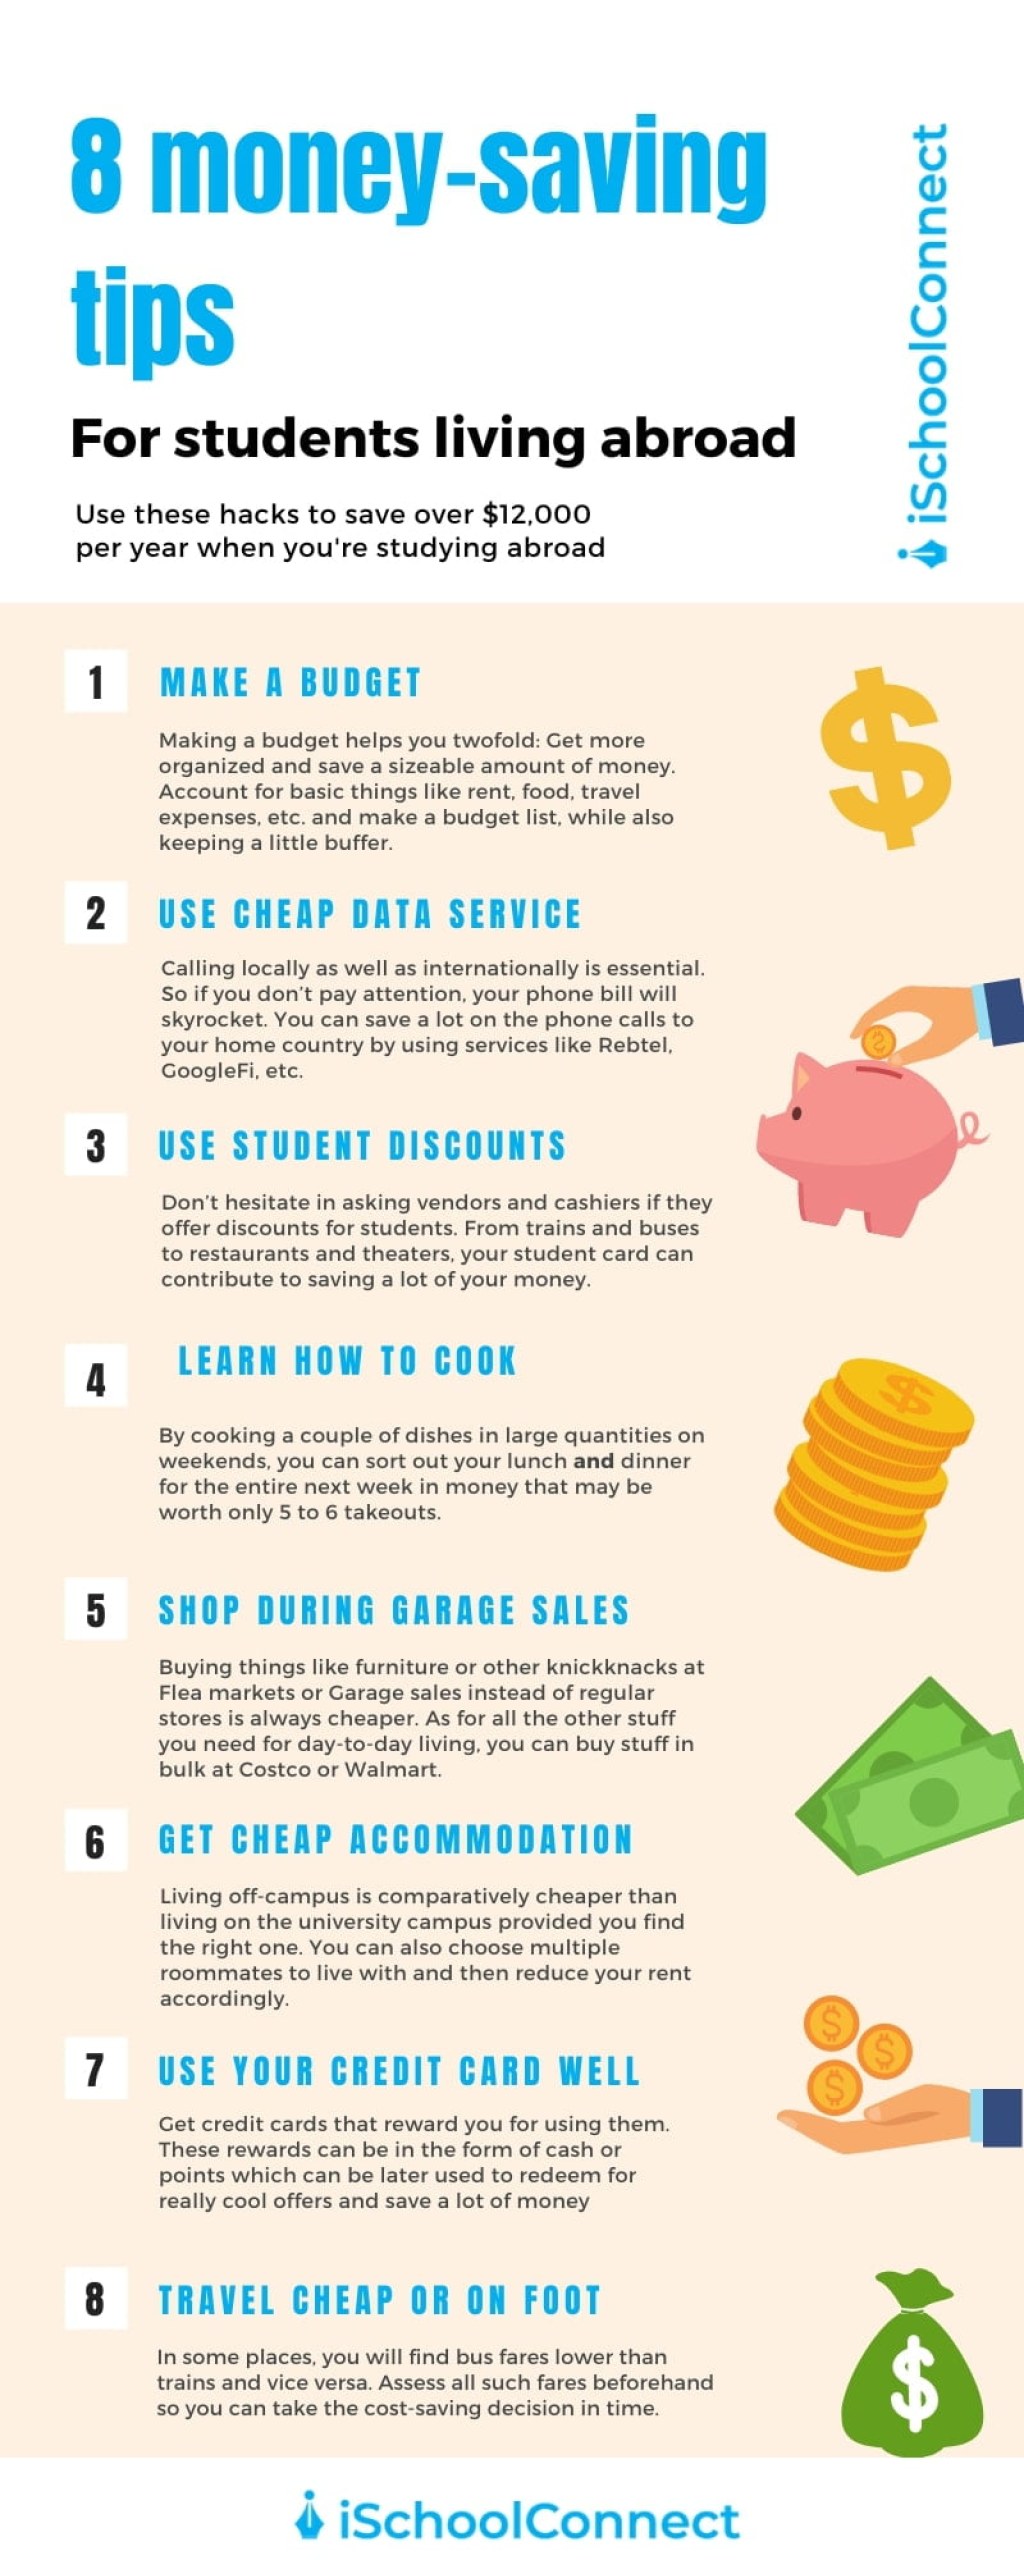 8 budgeting tips - Money Saving Tips   tips for students studying abroad